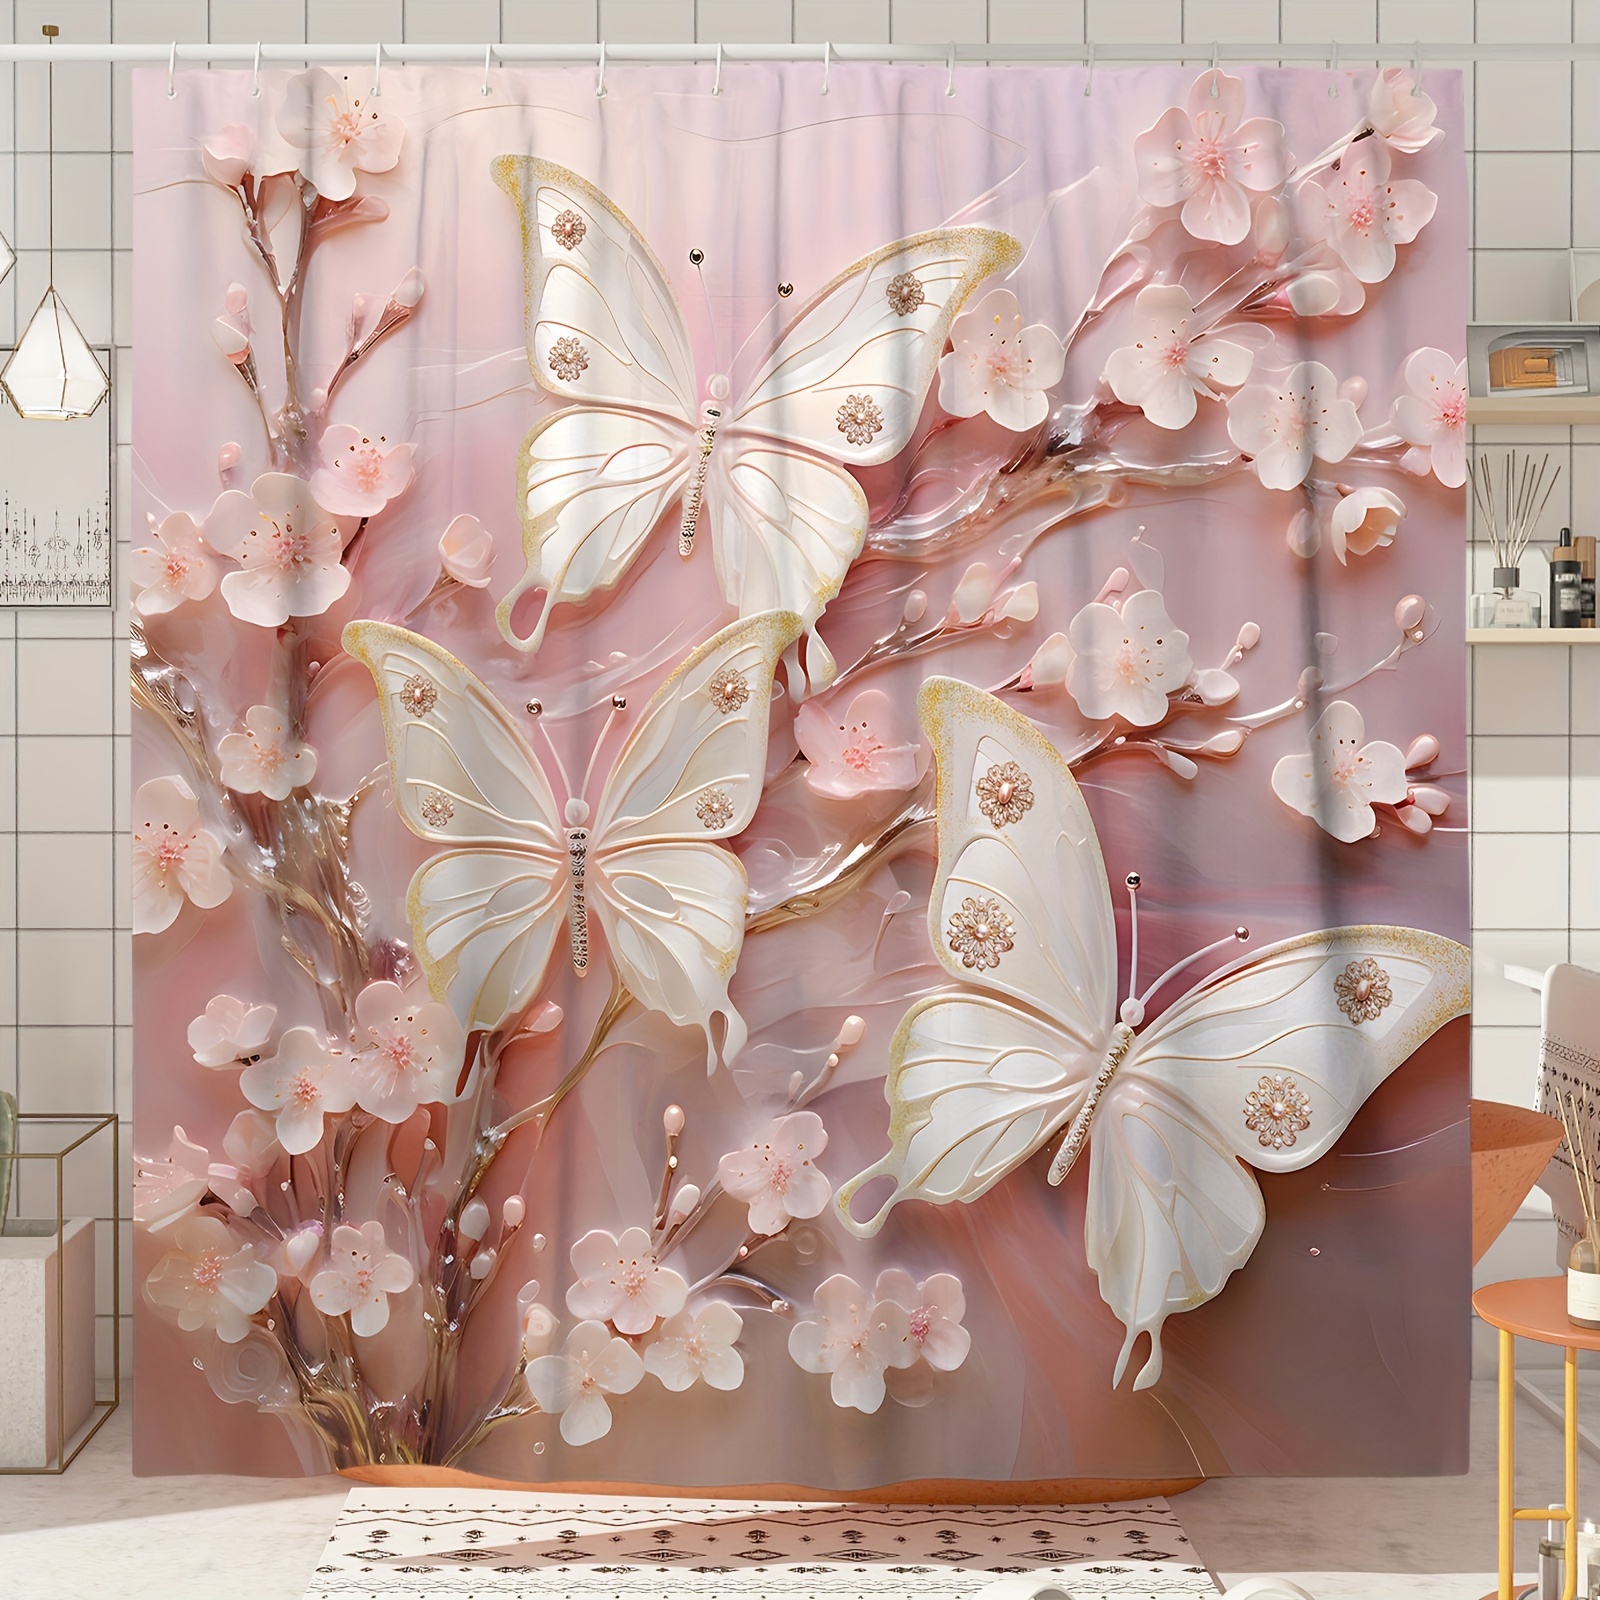 

1pc Luxury 3d Butterfly Floral Shower Curtain, Polyester, Waterproof, Machine Washable, Pink/white/gold, Includes 12 Hooks, Bathroom Decor For Home & Bathtub